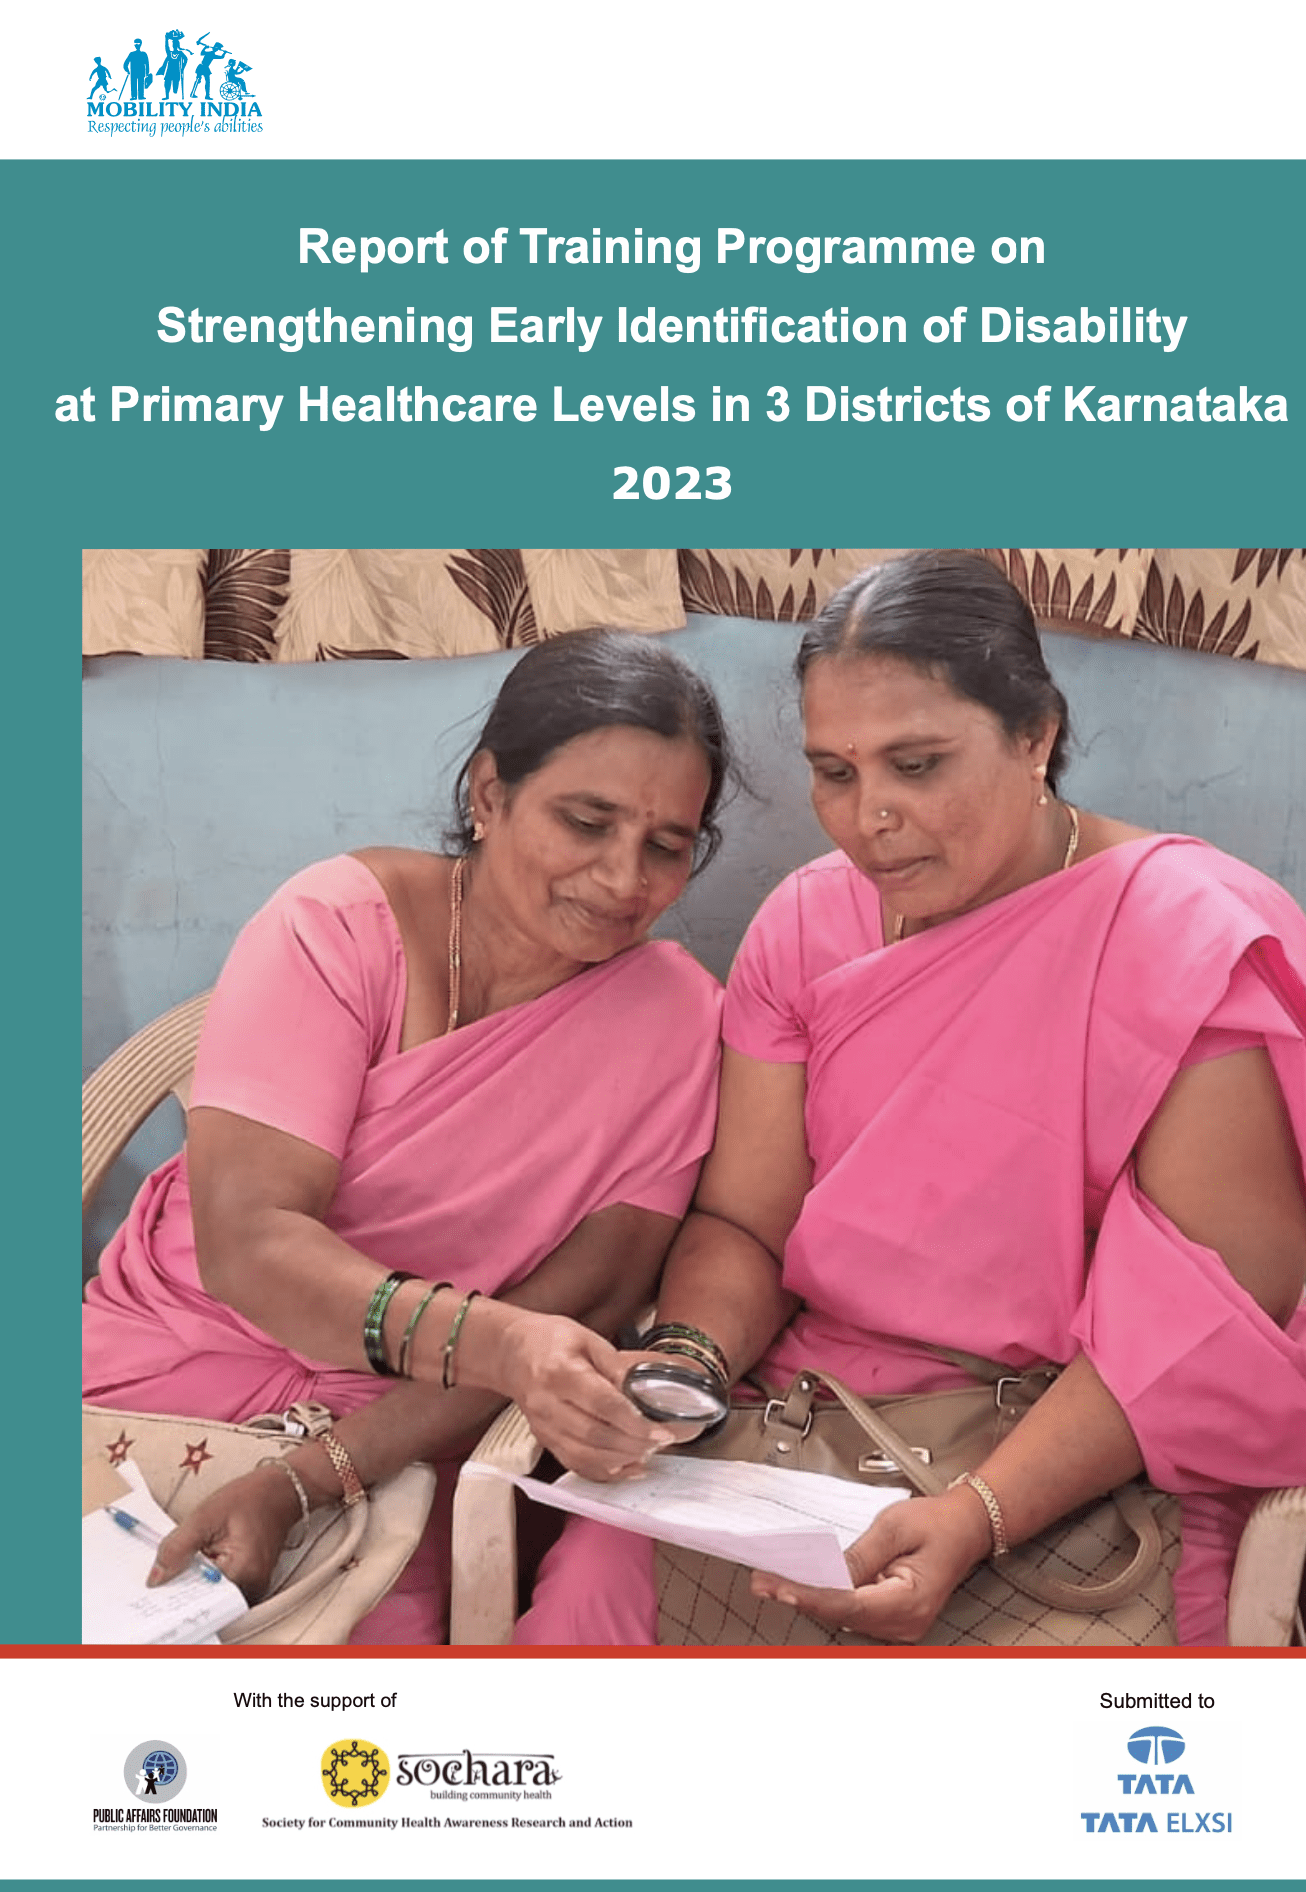 Report of Training Programme on Strengthening Early Identification of Disability at Primary Healthcare Levels in 3 Districts of Karnataka 2023